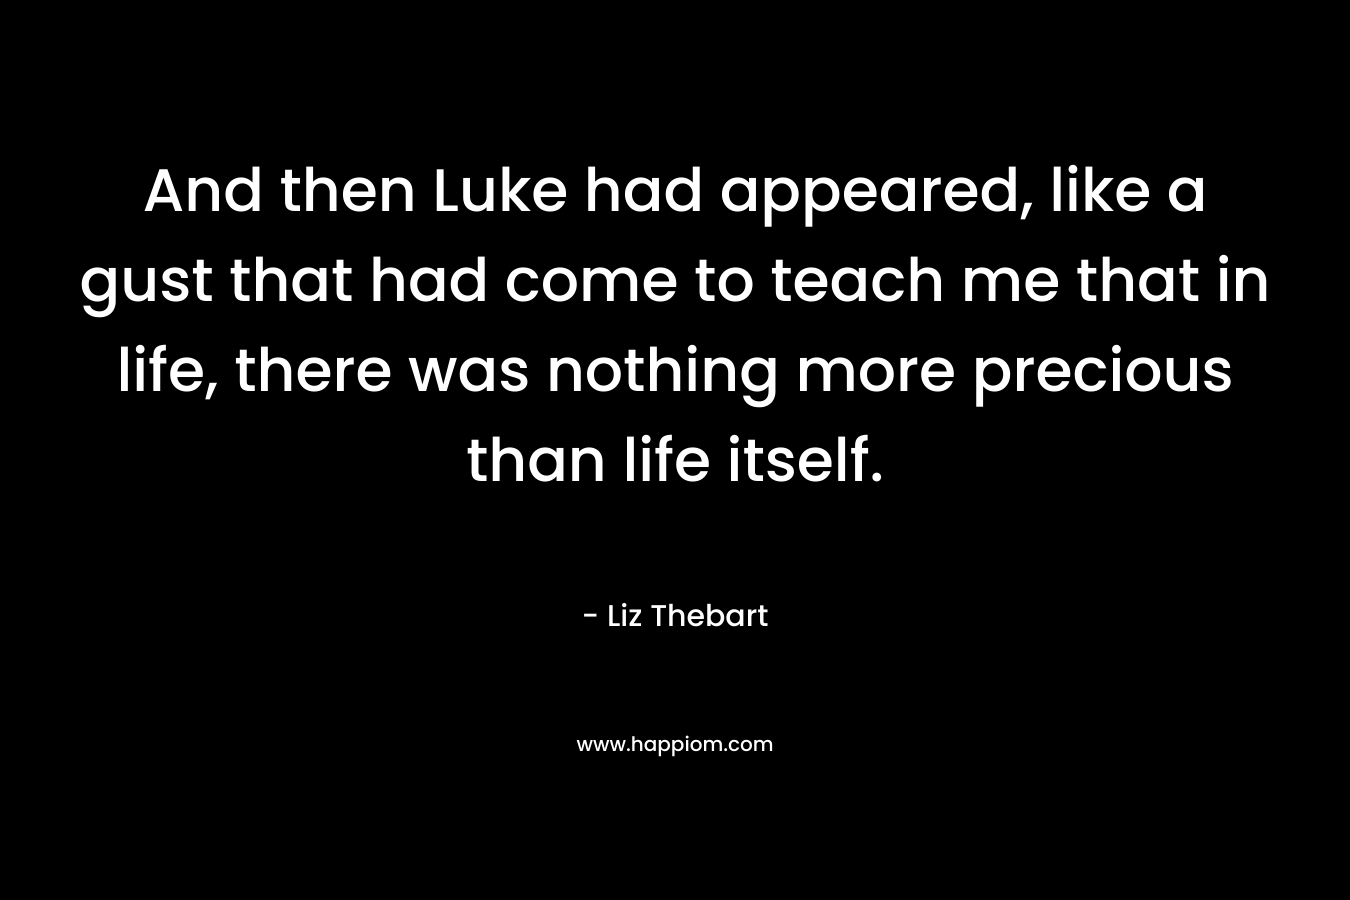 And then Luke had appeared, like a gust that had come to teach me that in life, there was nothing more precious than life itself.